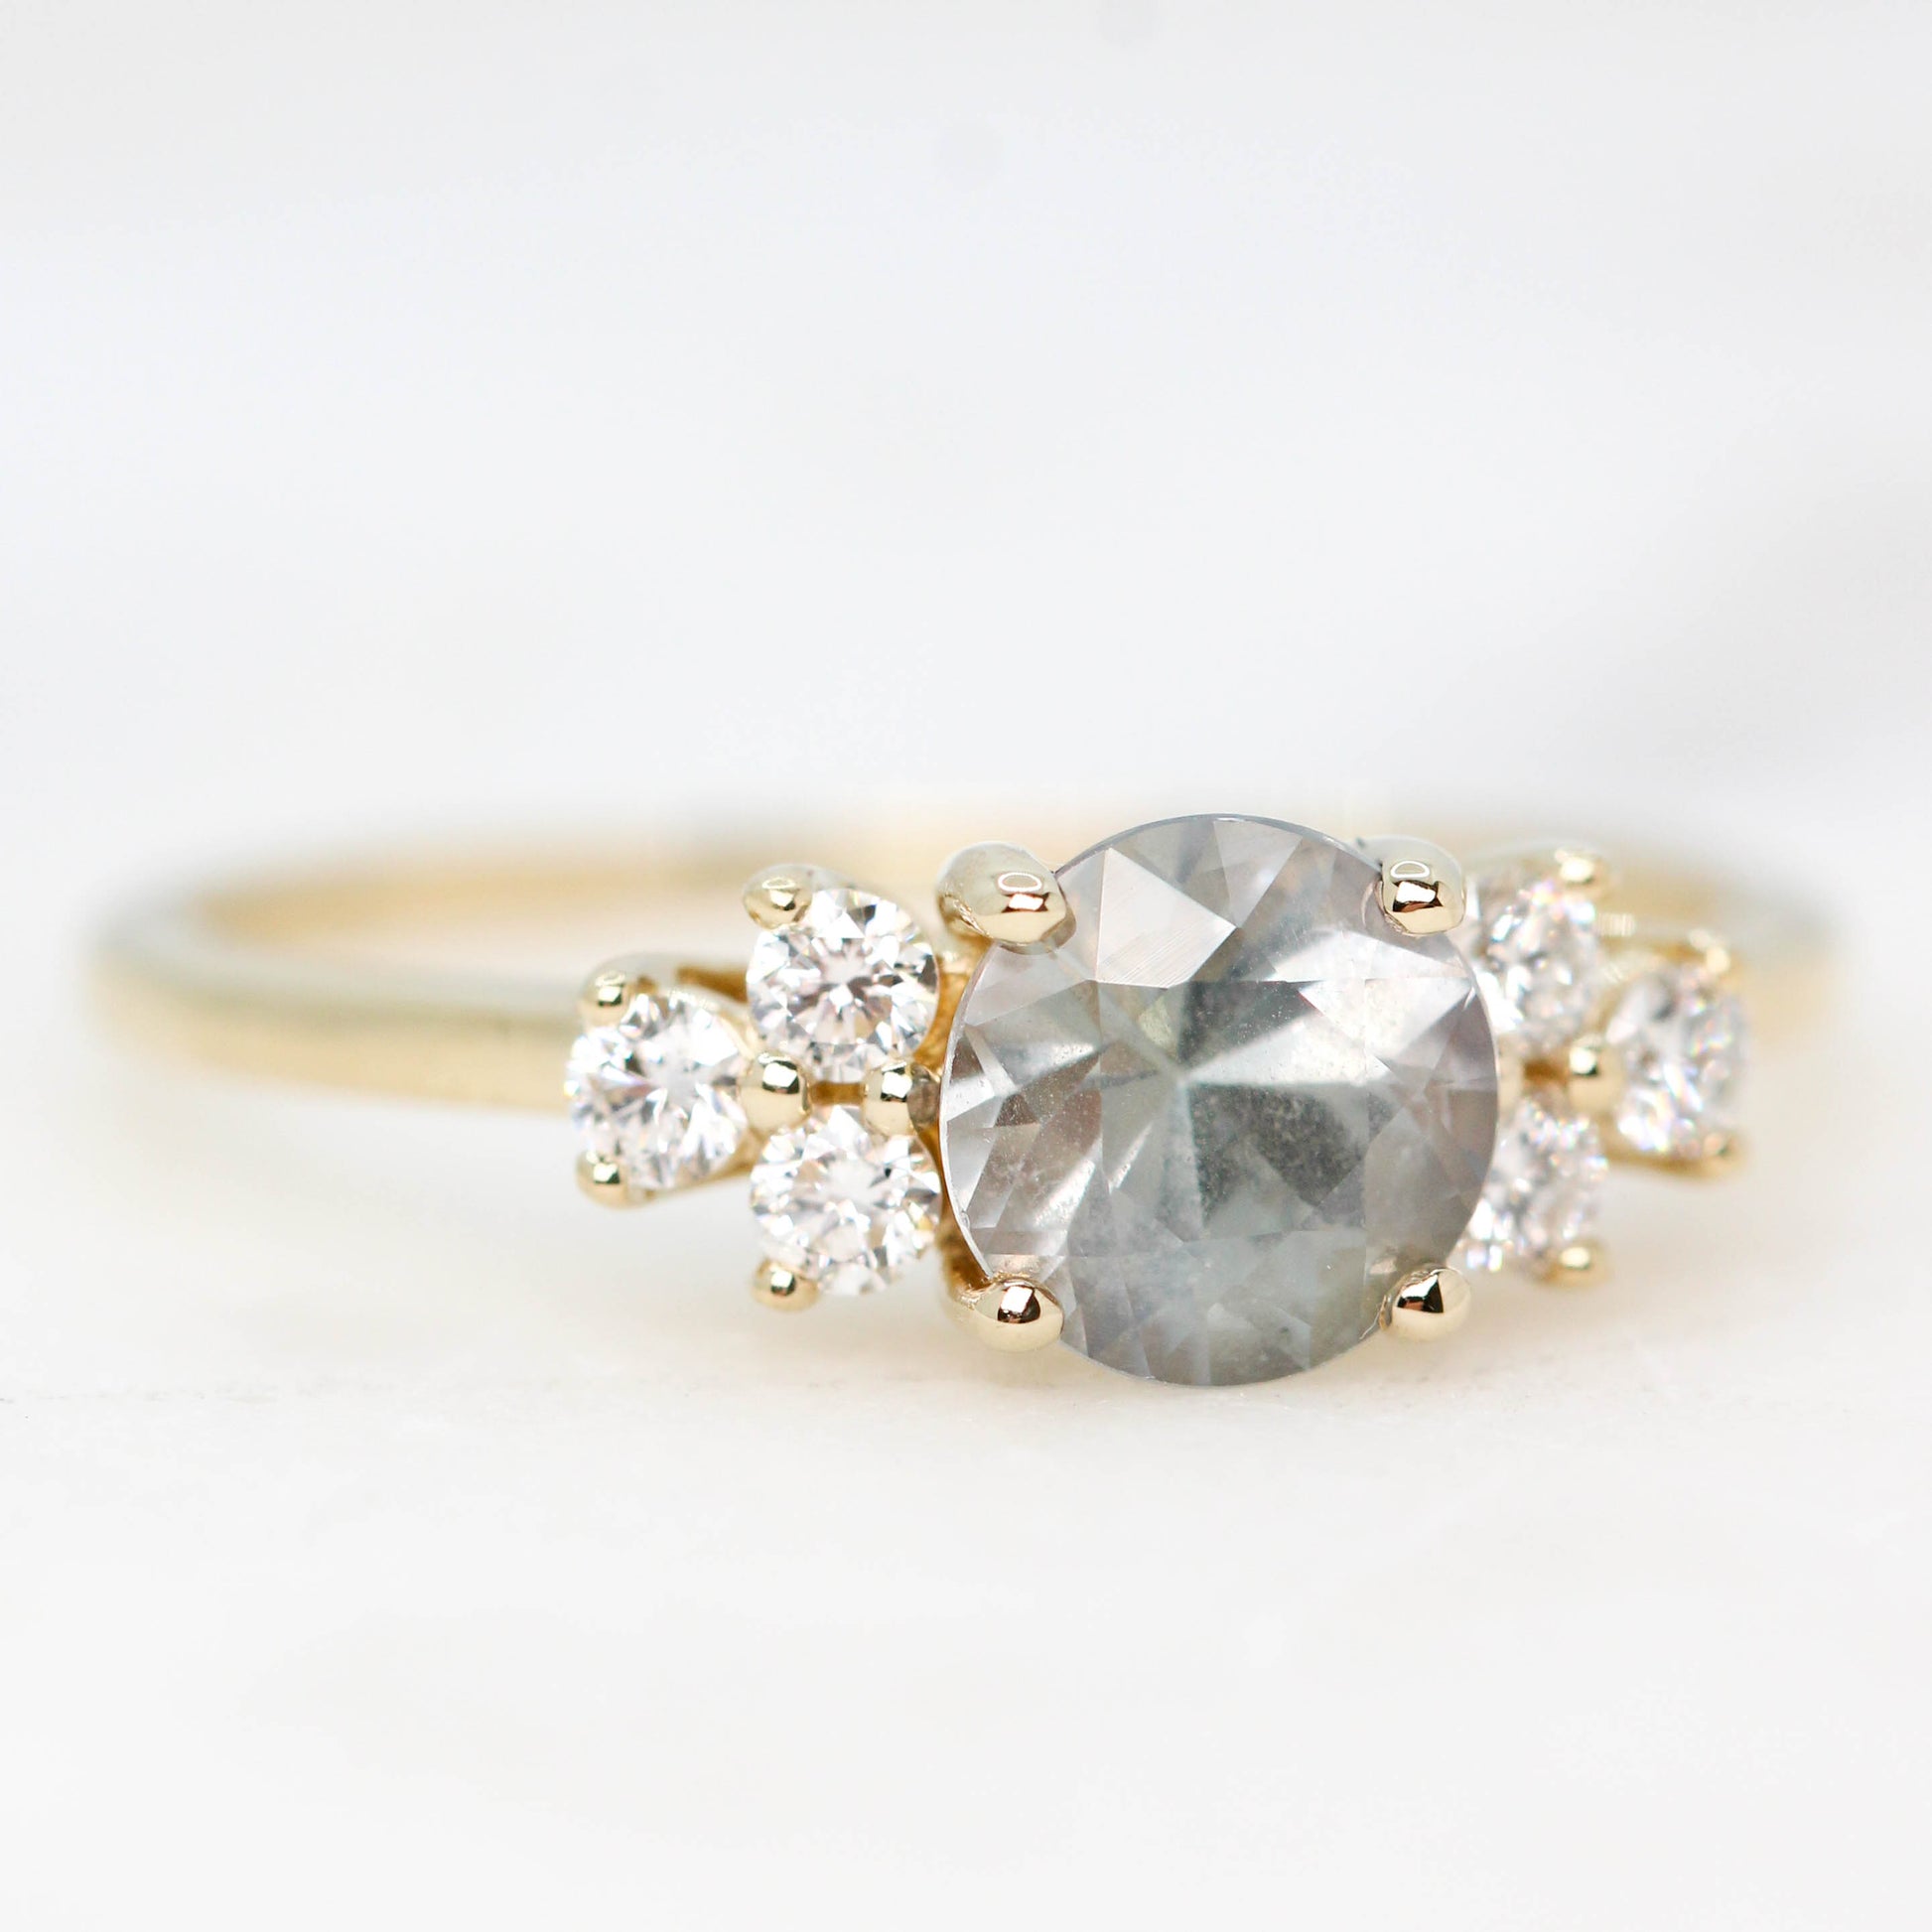 Veragene Ring with a 1.27 Carat Round Titanium Sapphire and White Accent Diamonds in 14k Yellow Gold - Ready to Size and Ship - Midwinter Co. Alternative Bridal Rings and Modern Fine Jewelry